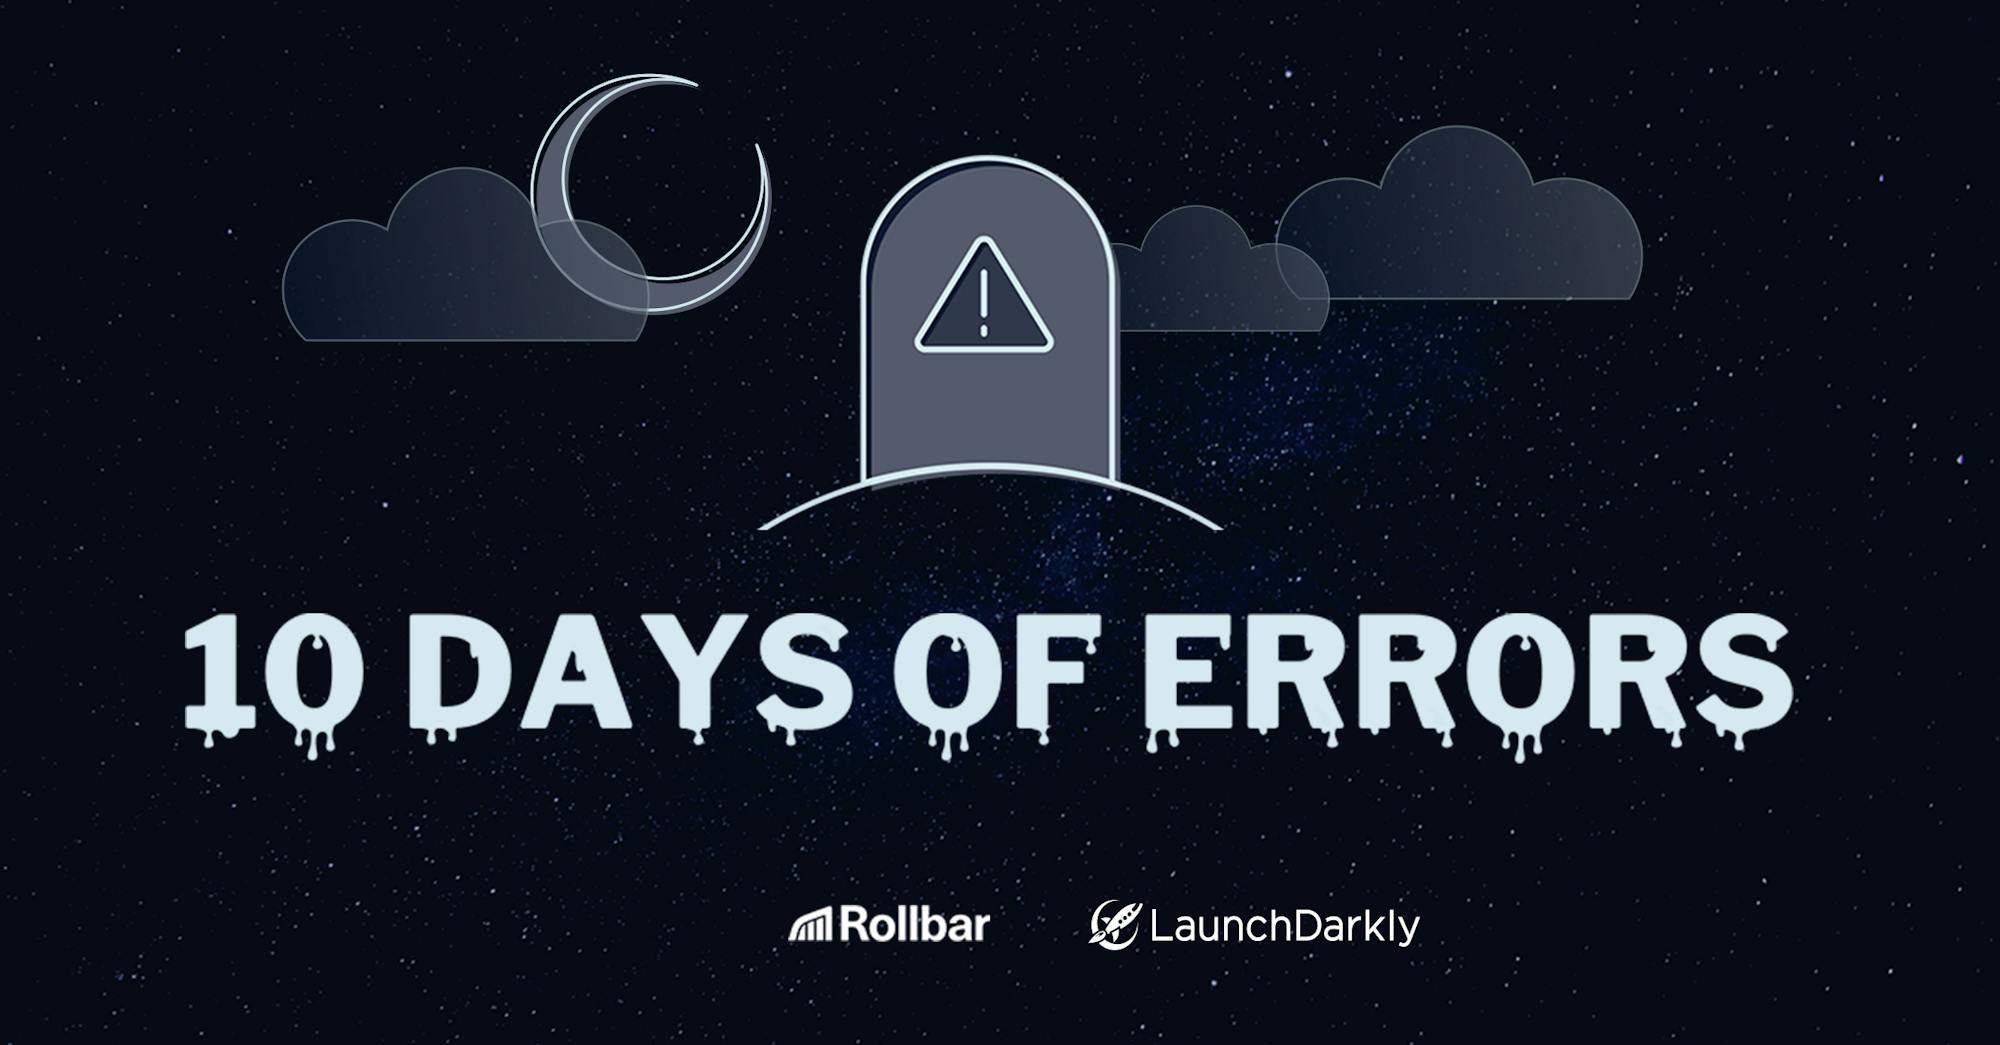 10 Days of Errors  featured image